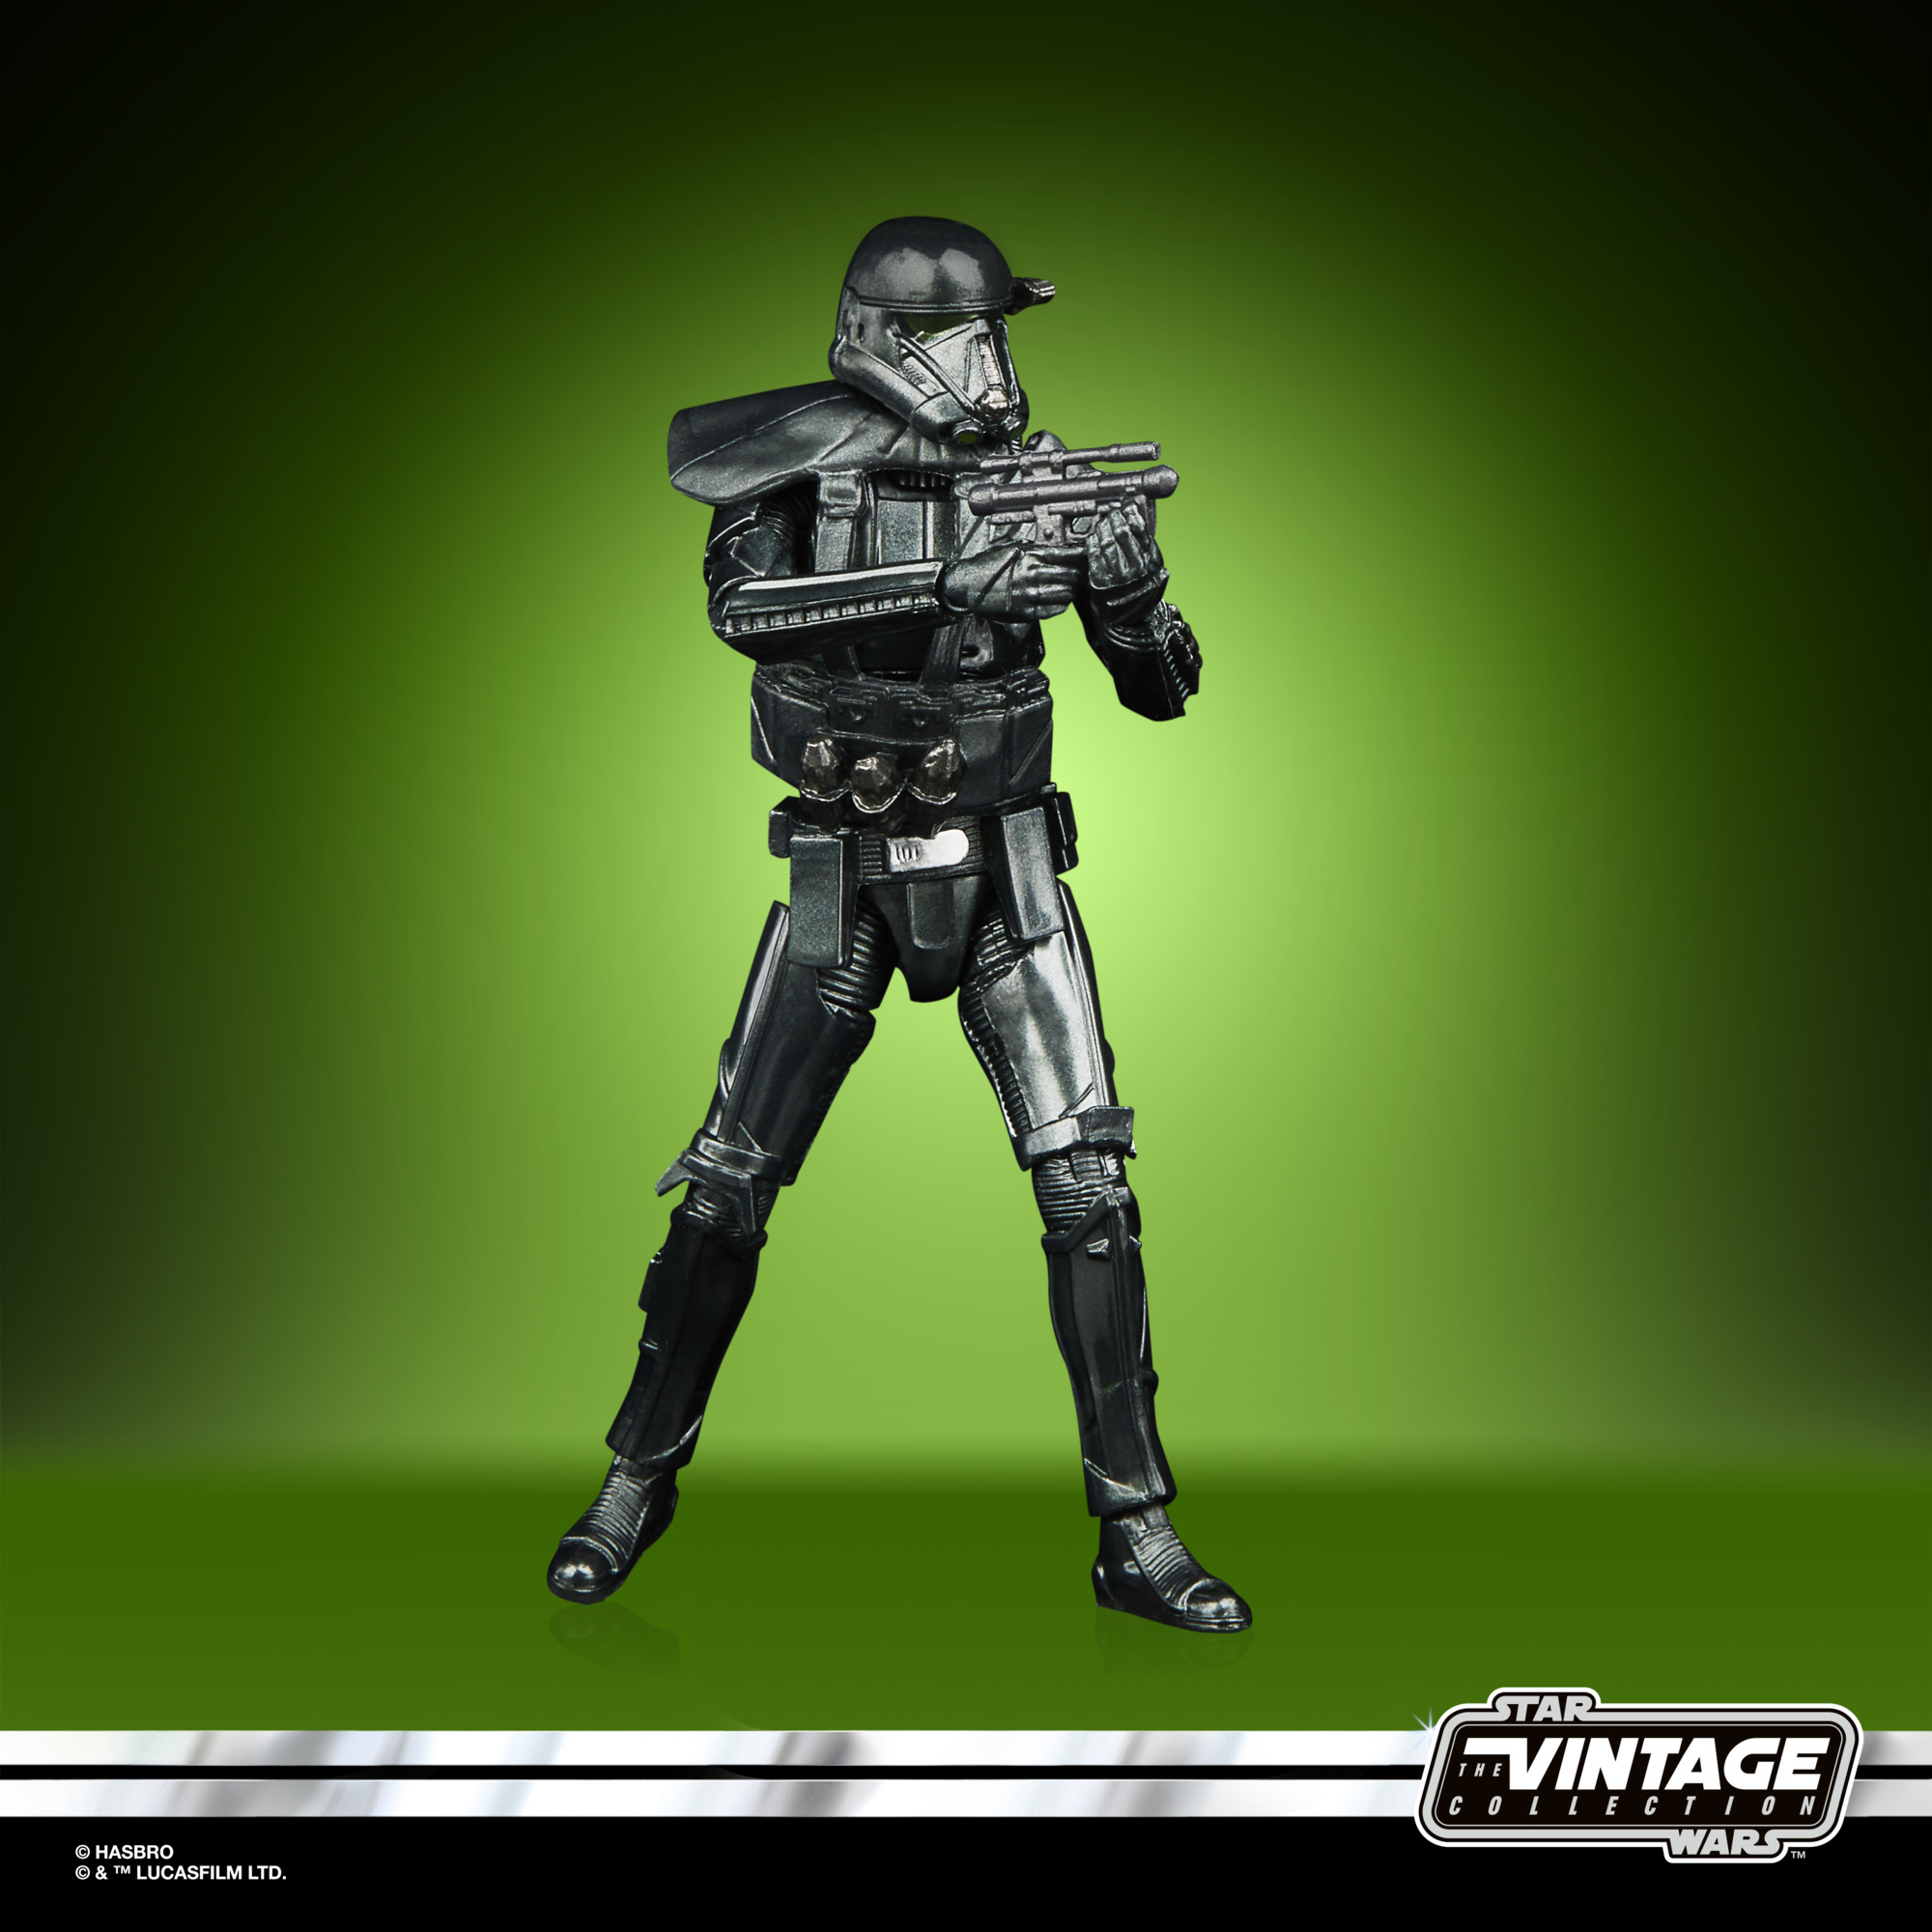 Star Wars: The Mandalorian The Vintage Collection Imperial Death Trooper Kids Toy Action Figure for Boys and Girls Ages 4 5 6 7 8 and Up (3.75”) - image 4 of 8